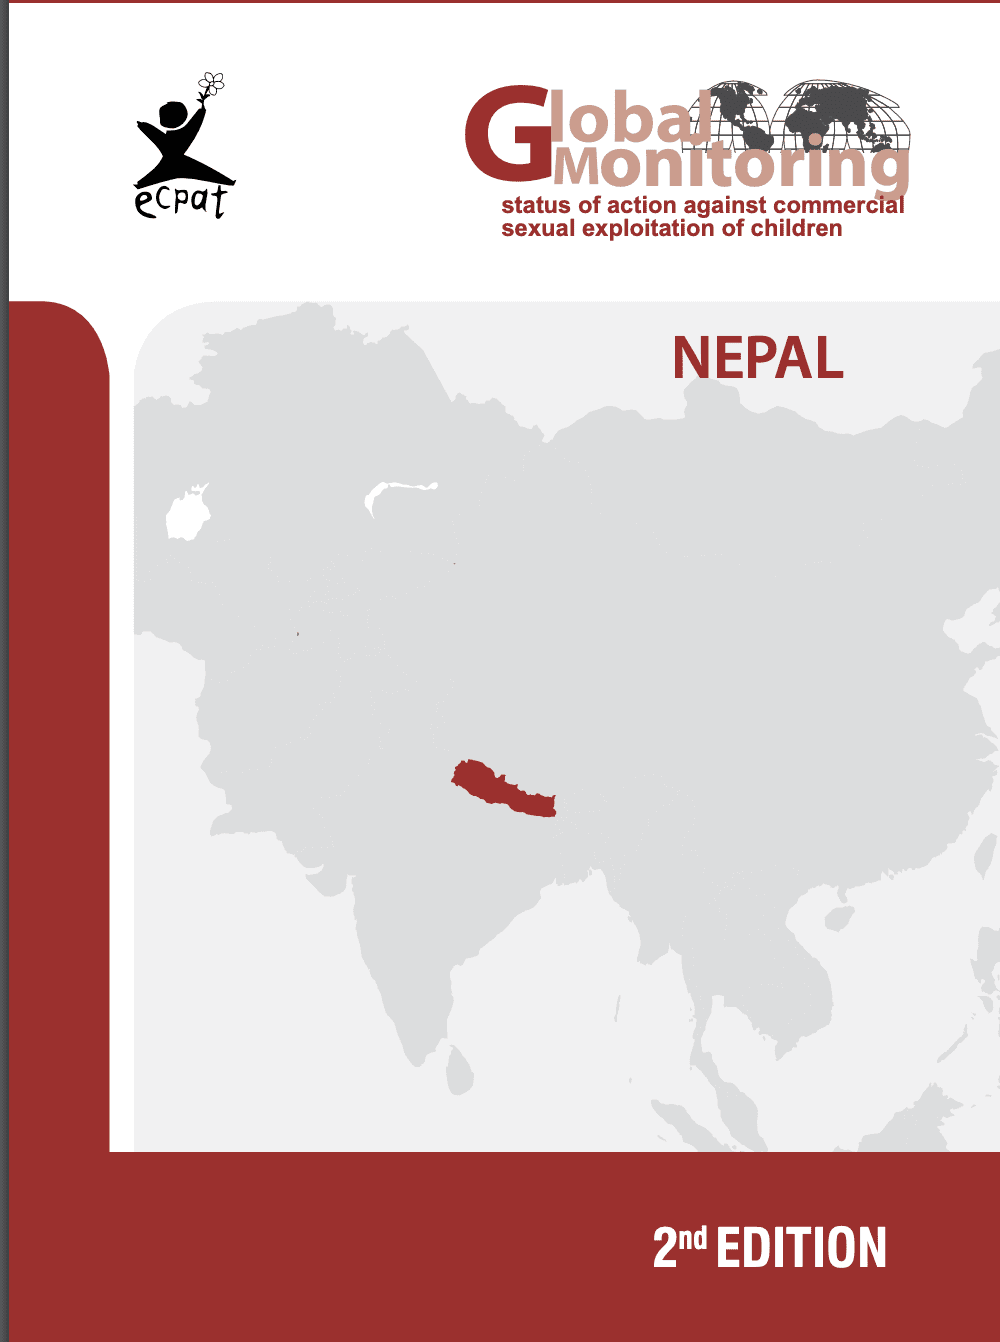 Global Monitoring Status of Action Against Commercial Sexual Exploitation of Children – Nepal